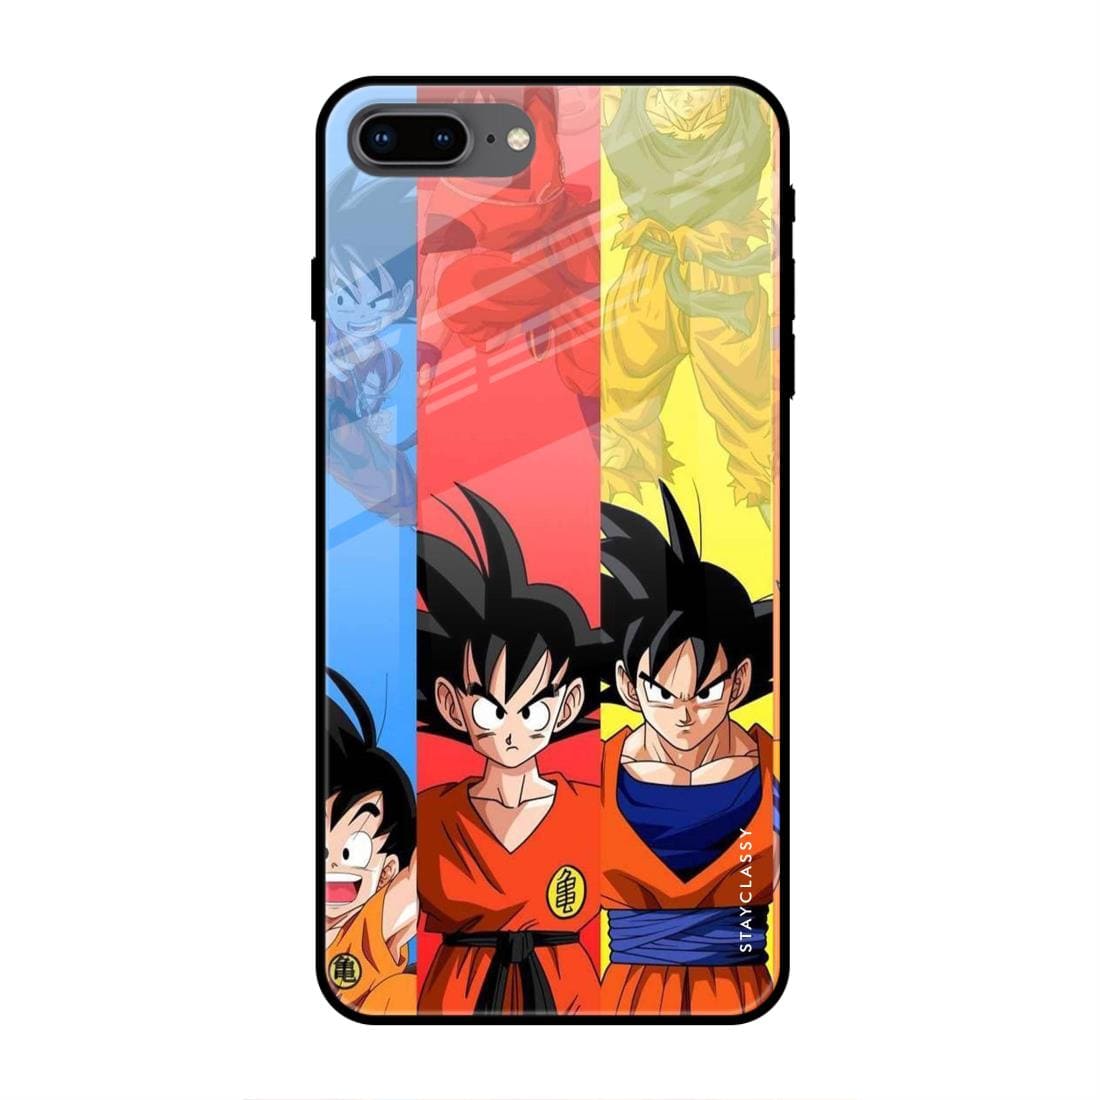 Buy Anime Sketch Premium Glass Case for iPhone 7 Plus Shock Proof Scratch  Resistant Online in India at Bewakoof